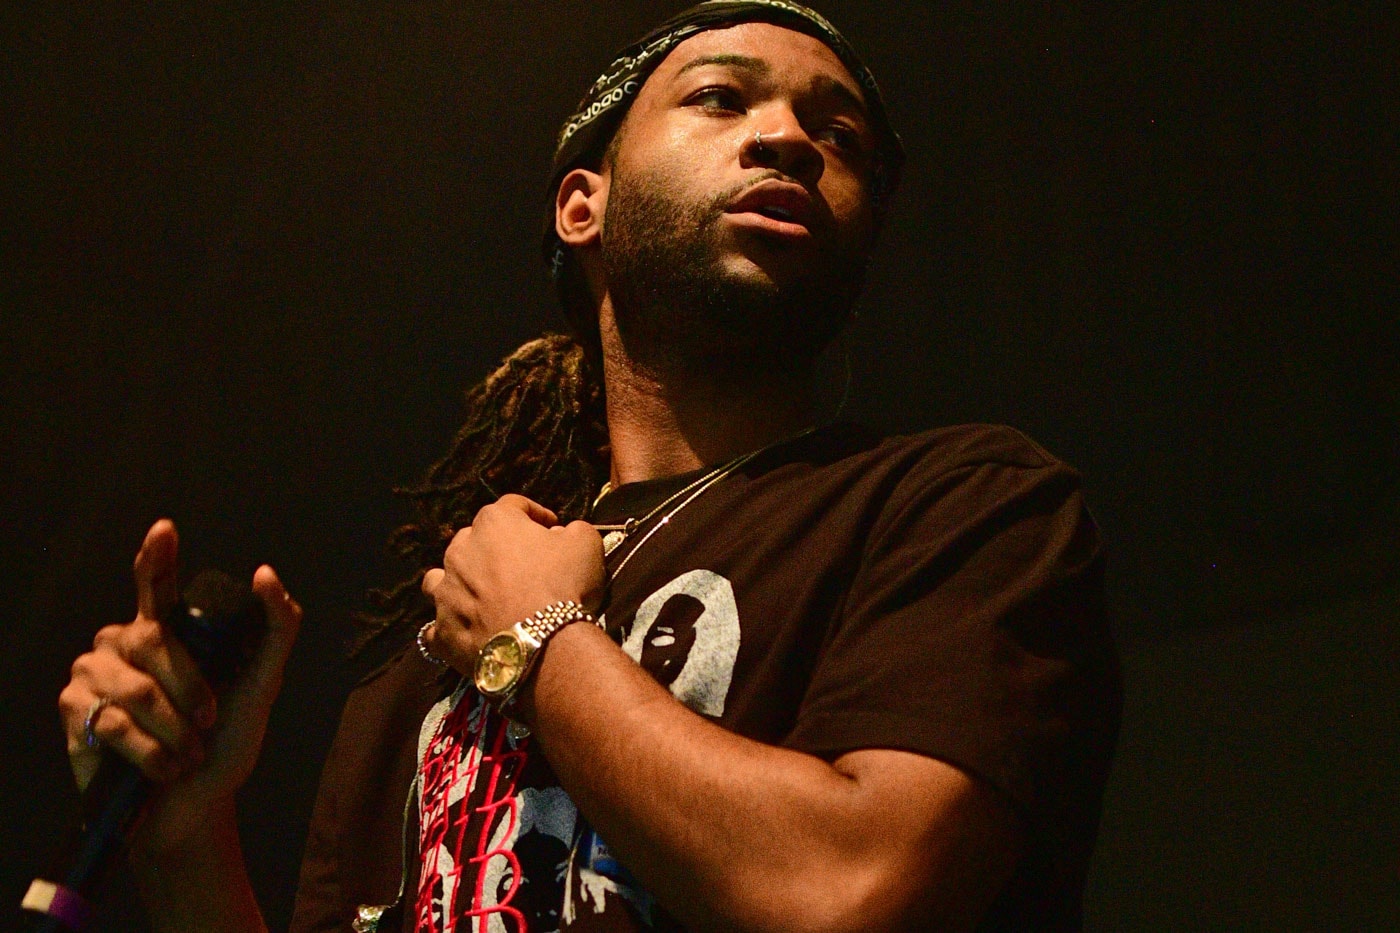 Preview This New PartyNextDoor Dancehall Song